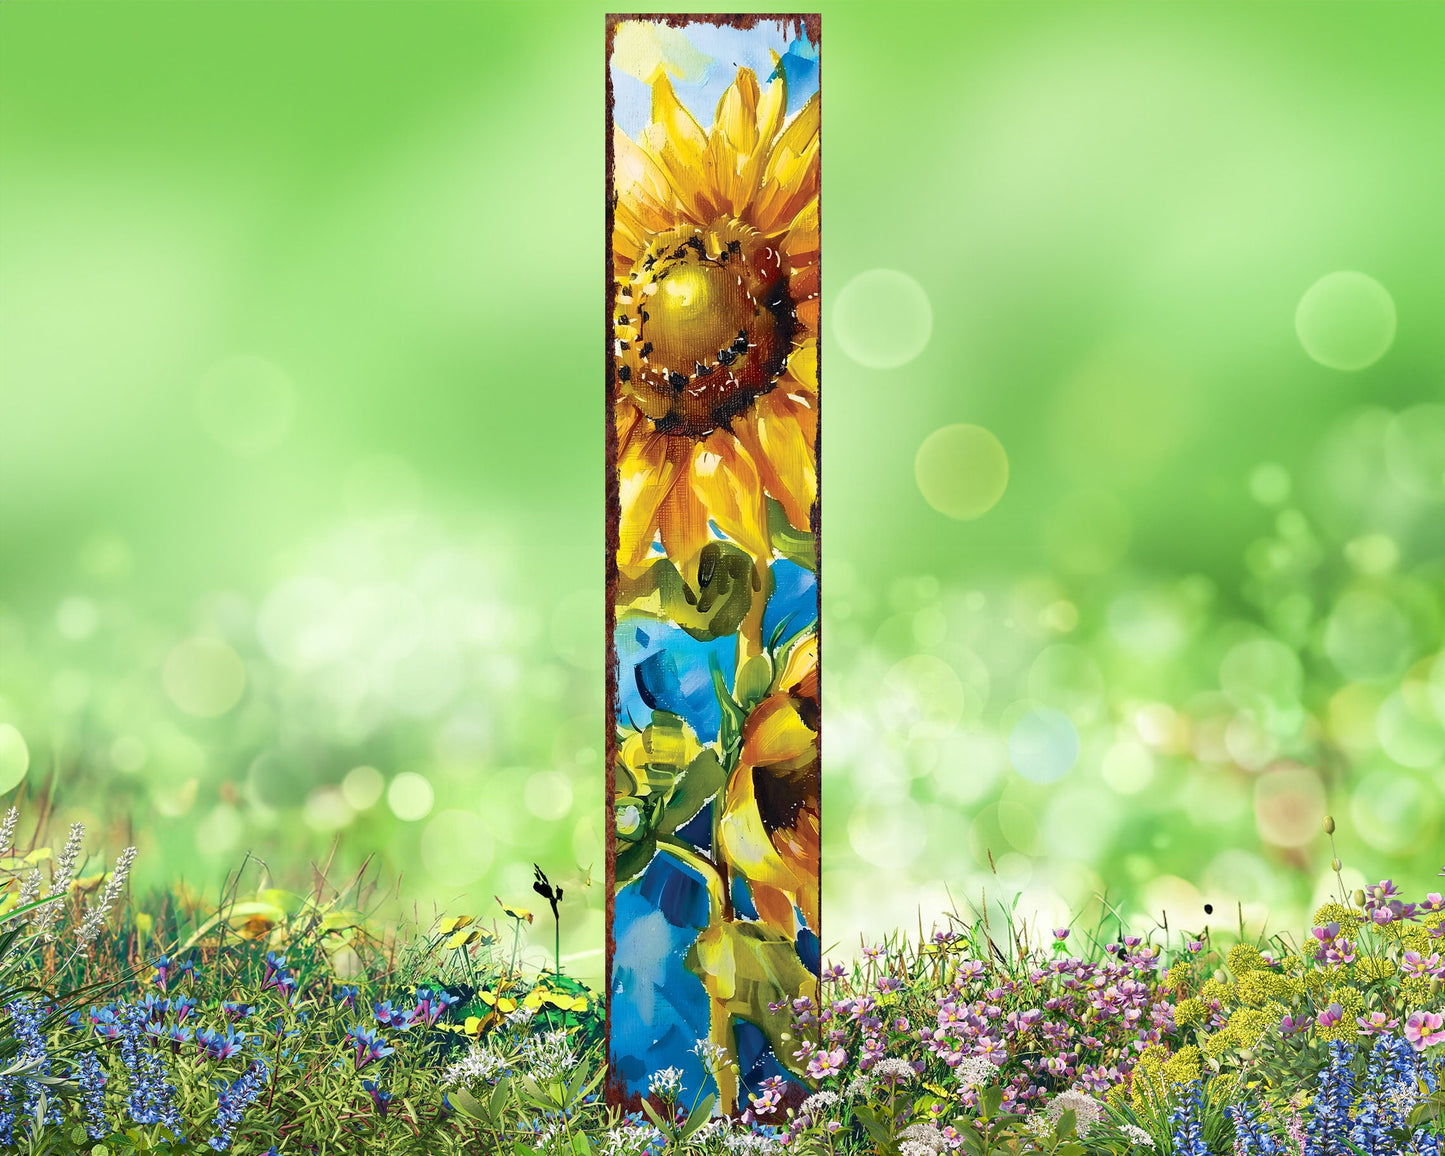 42in Summer Garden Stake | Oil Paint Style Sunflower Decor - Ideal for Outdoor, Yard, and Garden Decor